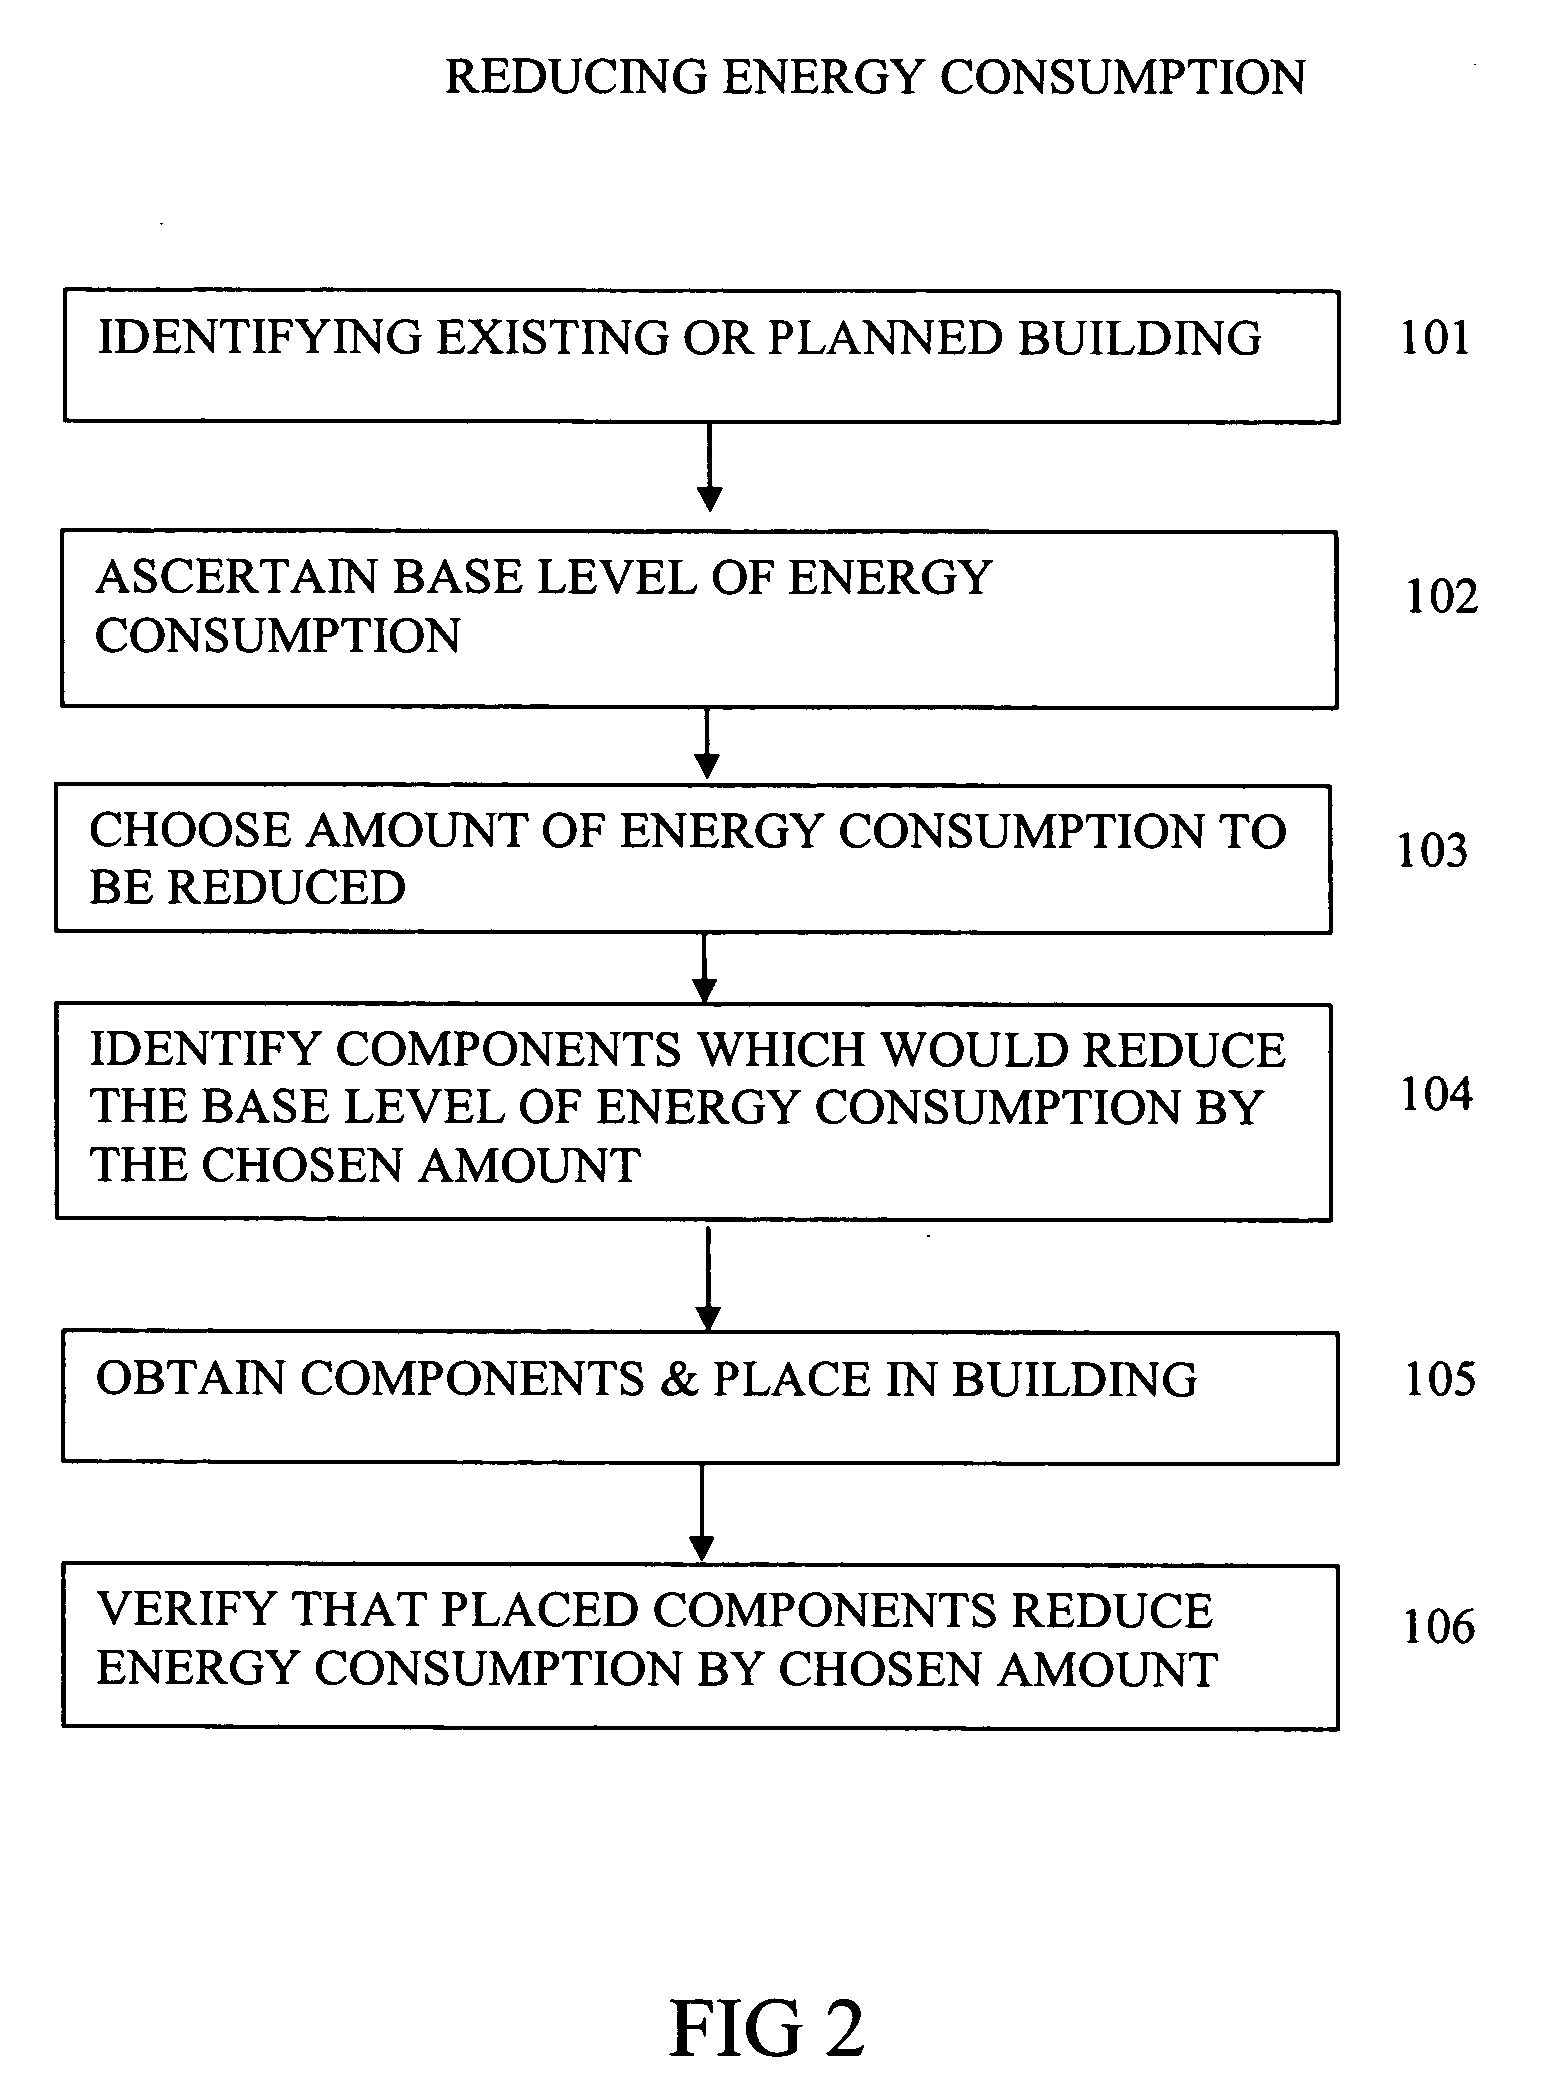 System and method for creating and using energy credits derived from the construction industry while maintaining green certificateion